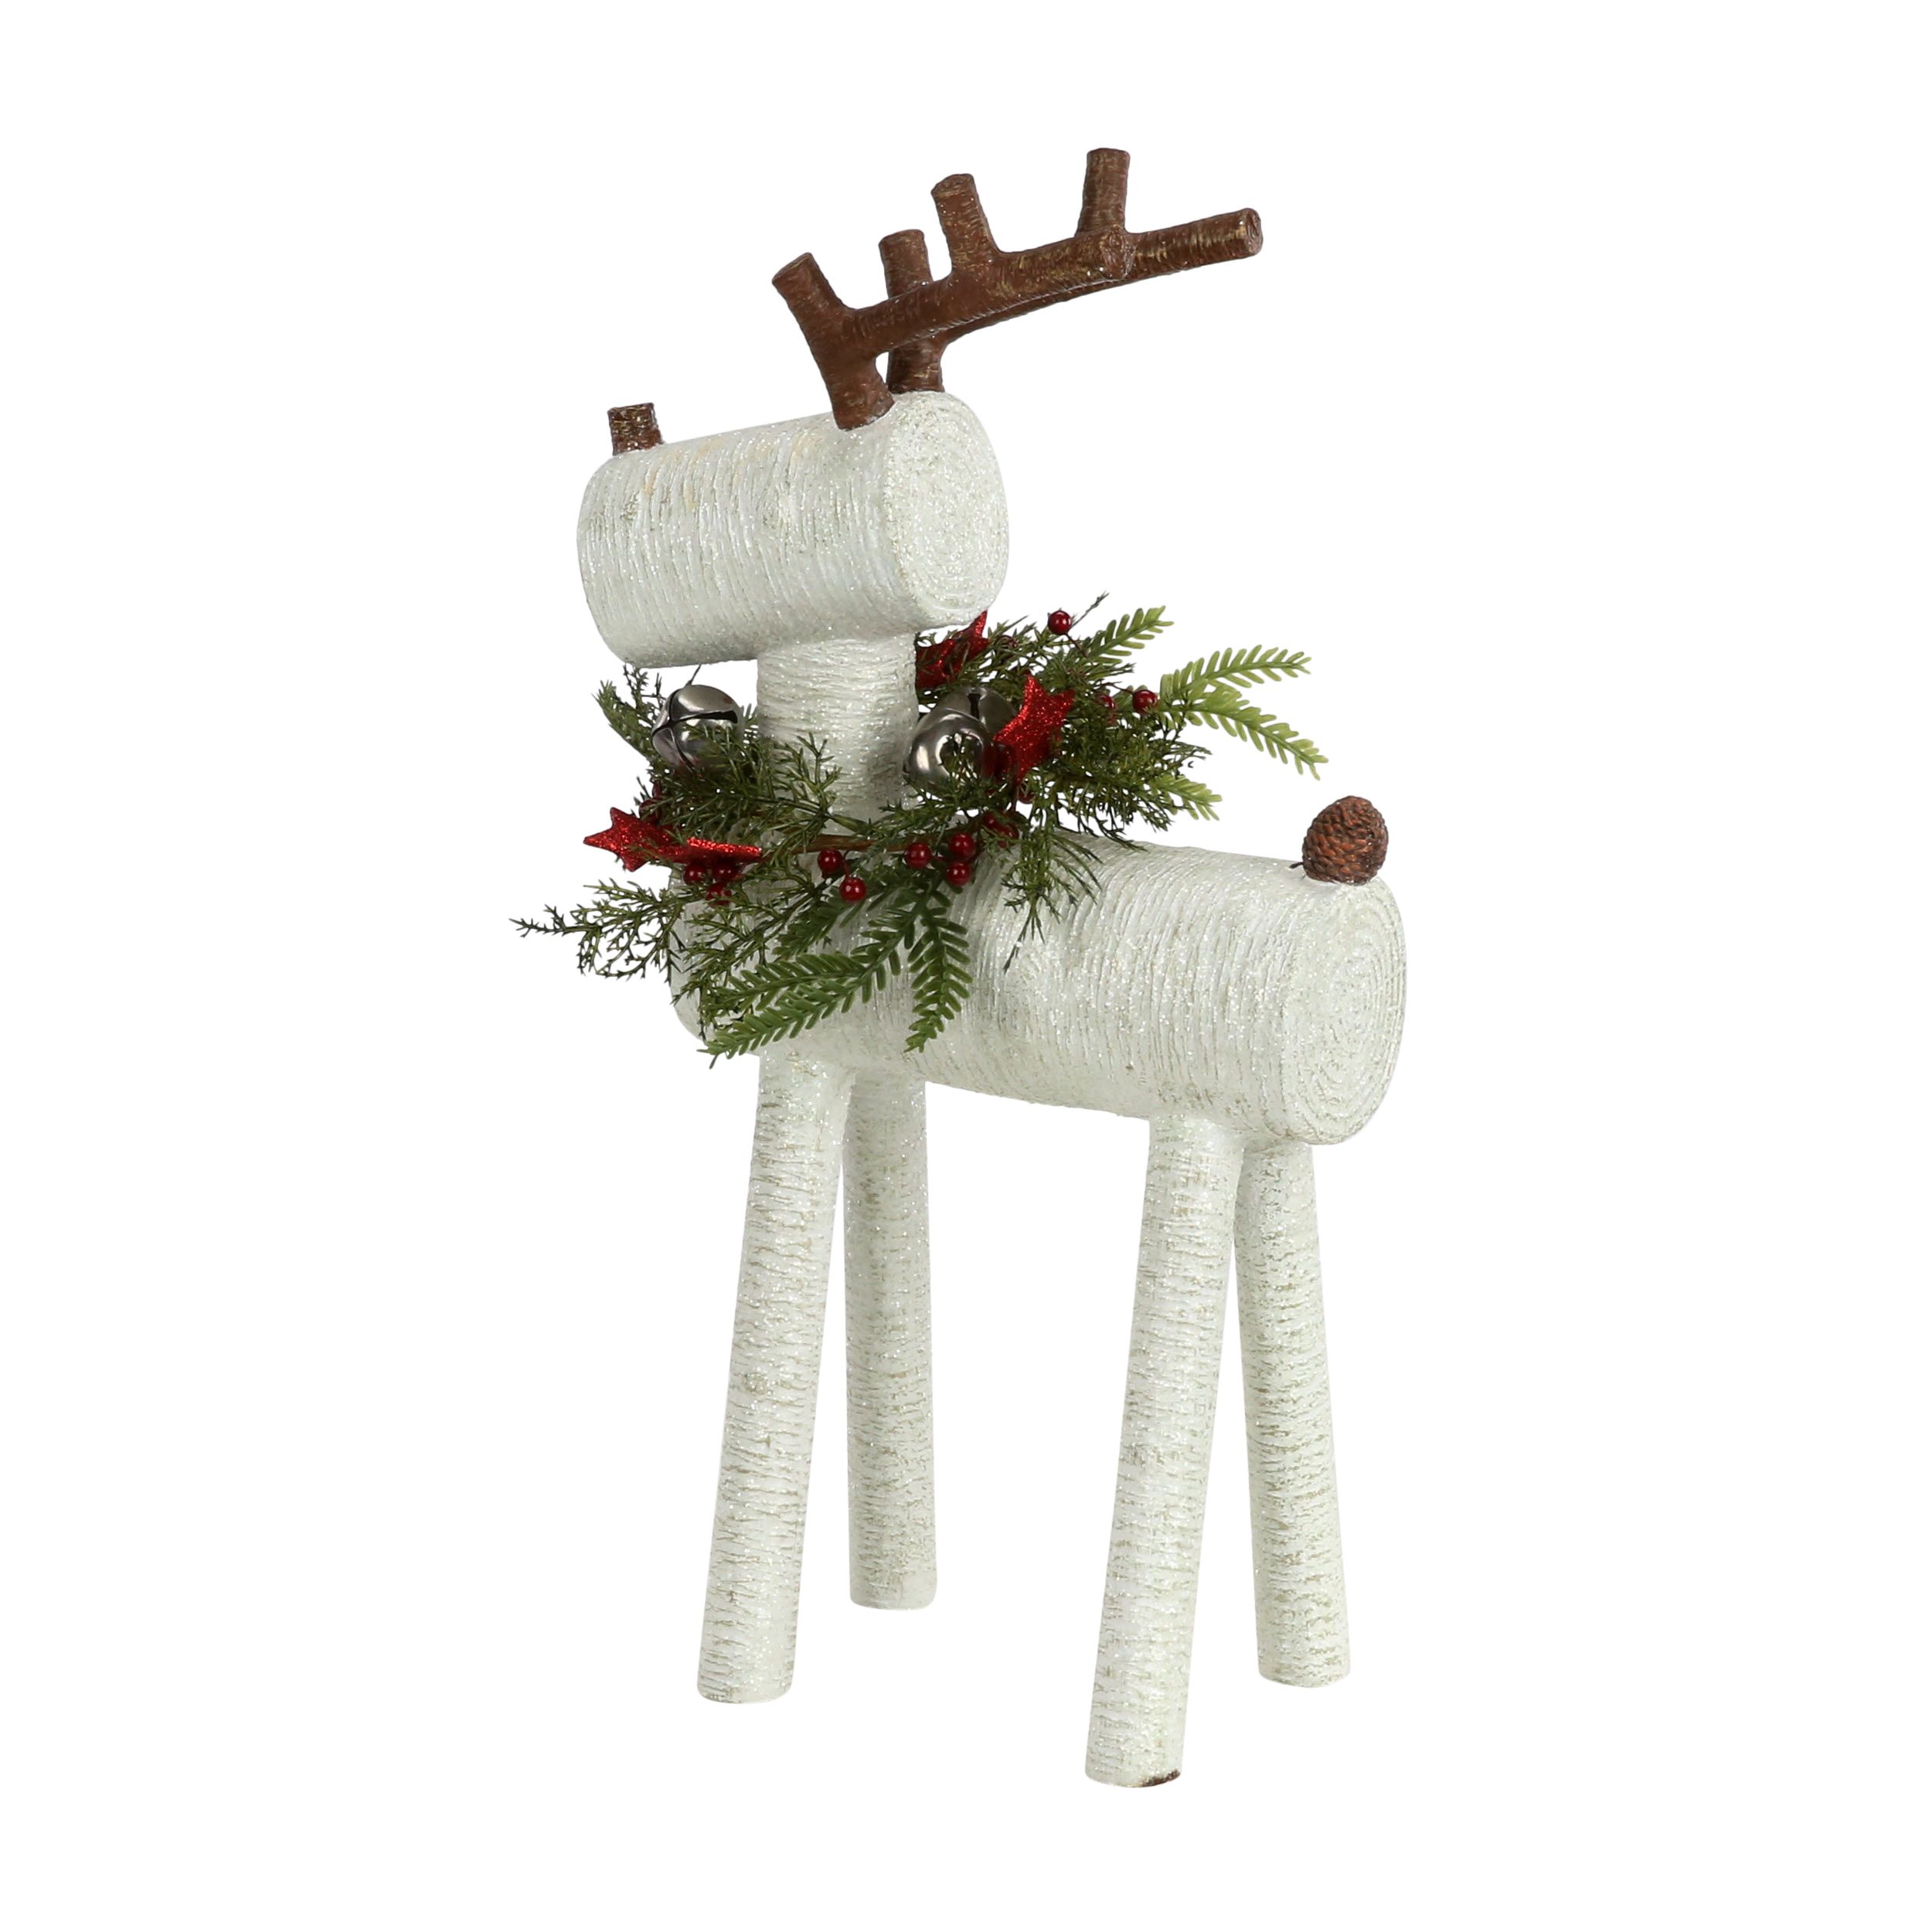 Details about   Lowes Holiday Living Ceramic Deer Reindeer Head Christmas Tree Ornament 0585575 